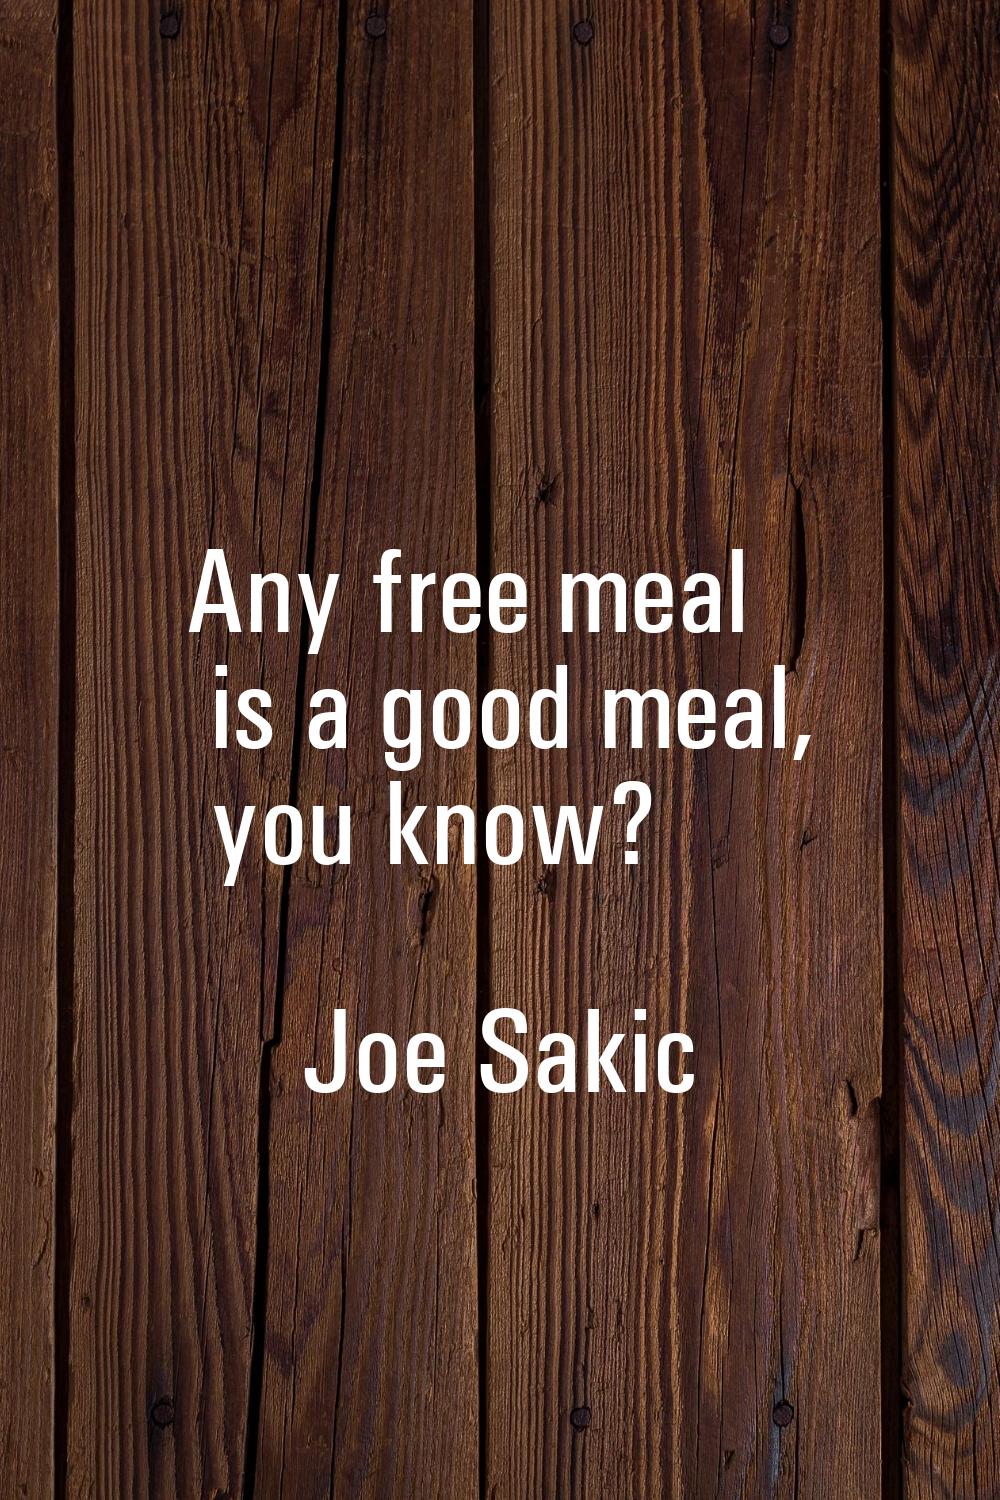 Any free meal is a good meal, you know?